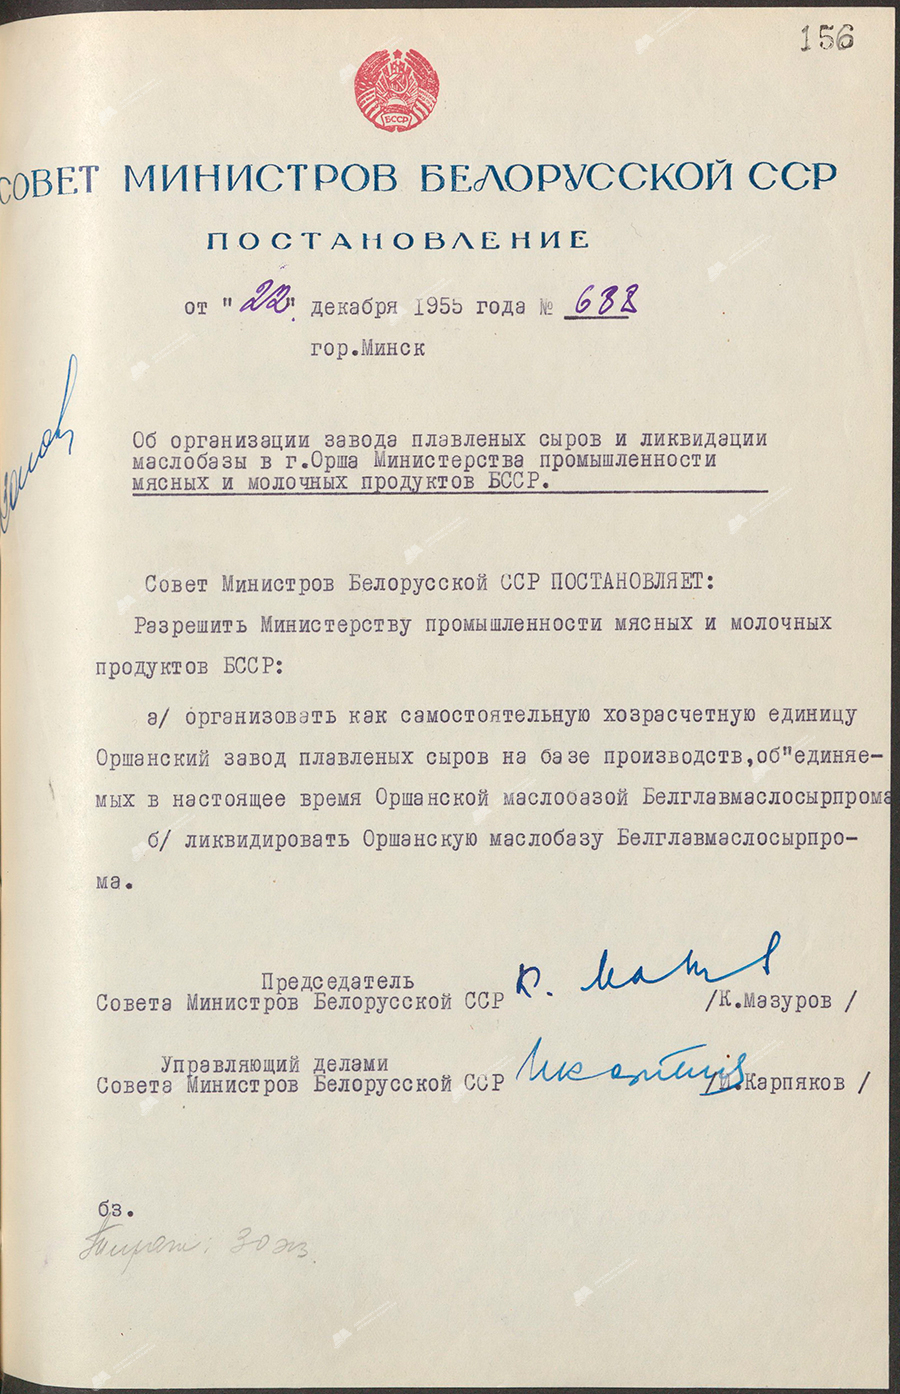 Resolution No. 688 of the Council of Ministers of the Byelorussian SSR «On the organization of a processed cheese plant and the liquidation of a butter storage facility in Orsha of the Ministry of the Industry of Meat and Dairy Products of the BSSR»-стр. 0